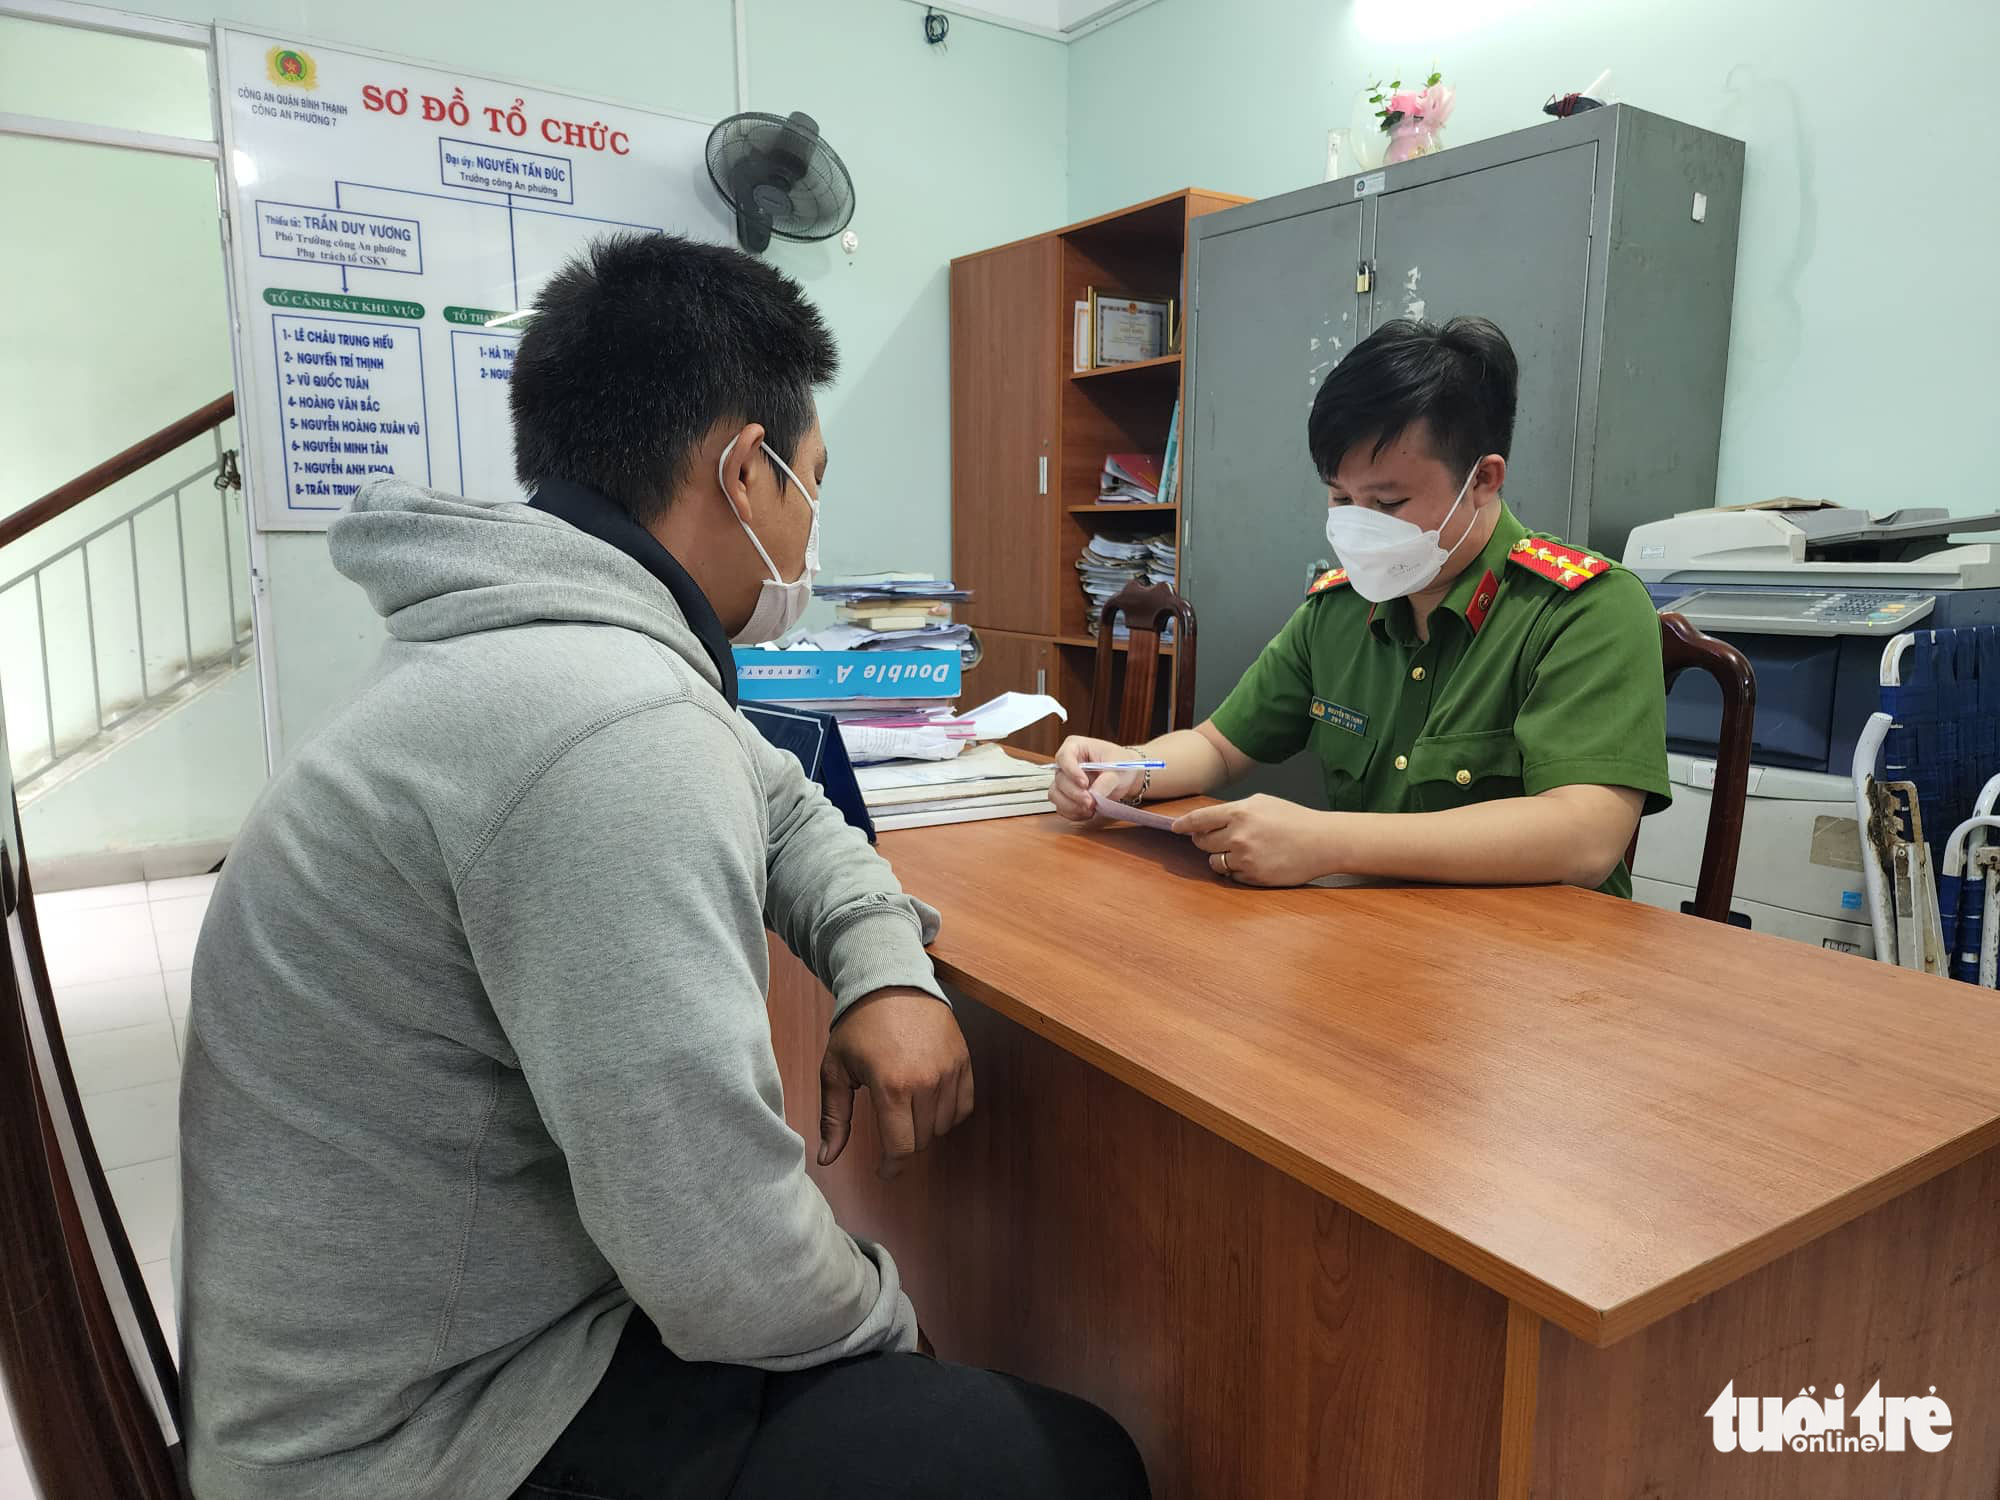 Another doctor attacked at Ho Chi Minh City hospital